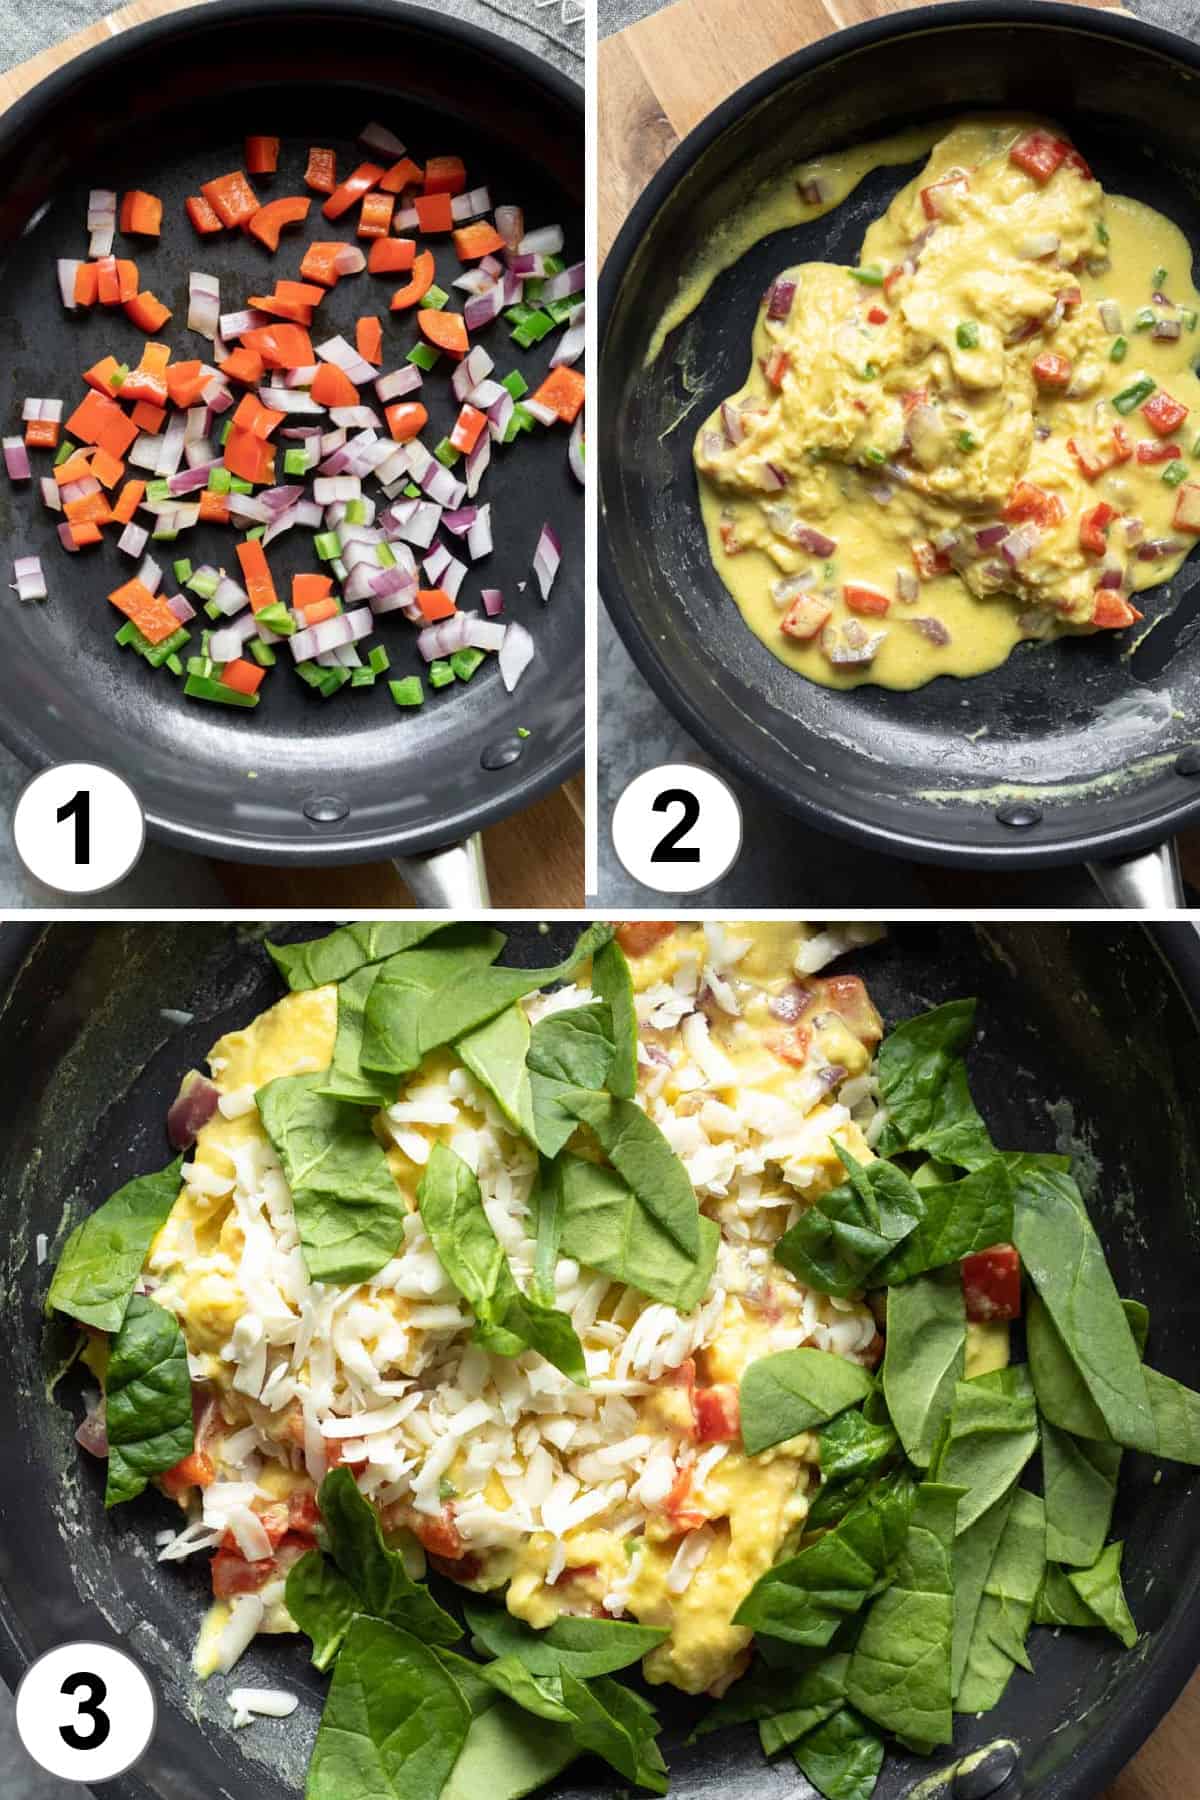 a 3-photo collage showing the progression of cooking the liquid eggs with veggies.